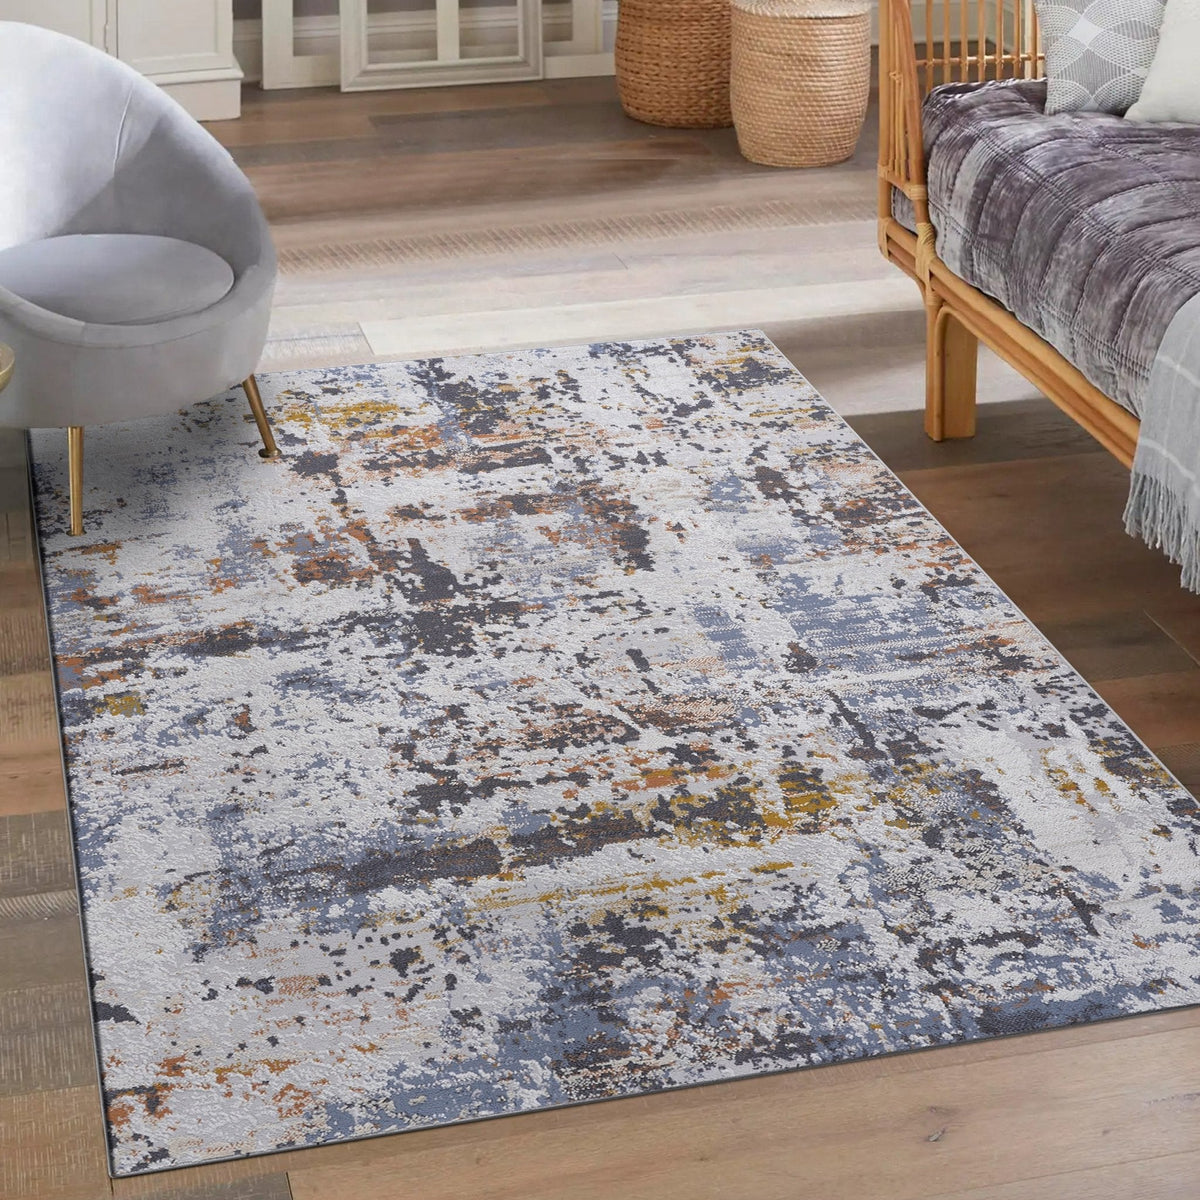 Payas Ivory - Blue Rug Size 6'7'' x 9' | Mid in Mod | Houston TX | Best Furniture stores in Houston